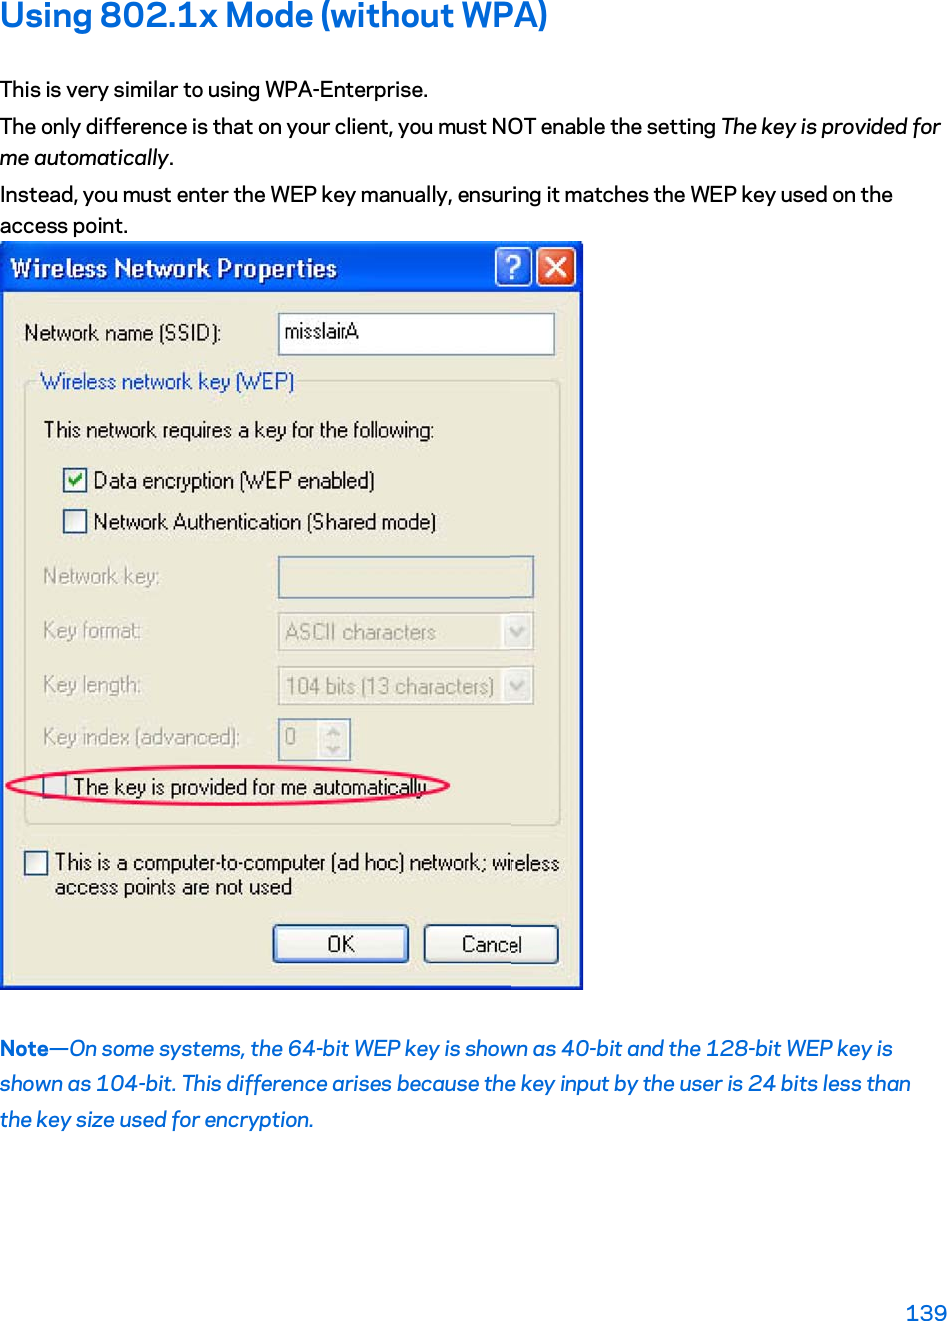 Using 802.1x Mode (without WPA) This is very similar to using WPA-Enterprise. The only difference is that on your client, you must NOT enable the setting The key is provided for me automatically. Instead, you must enter the WEP key manually, ensuring it matches the WEP key used on the access point. Note—On some systems, the 64-bit WEP key is shown as 40-bit and the 128-bit WEP key is shown as 104-bit. This difference arises because the key input by the user is 24 bits less than the key size used for encryption. 139